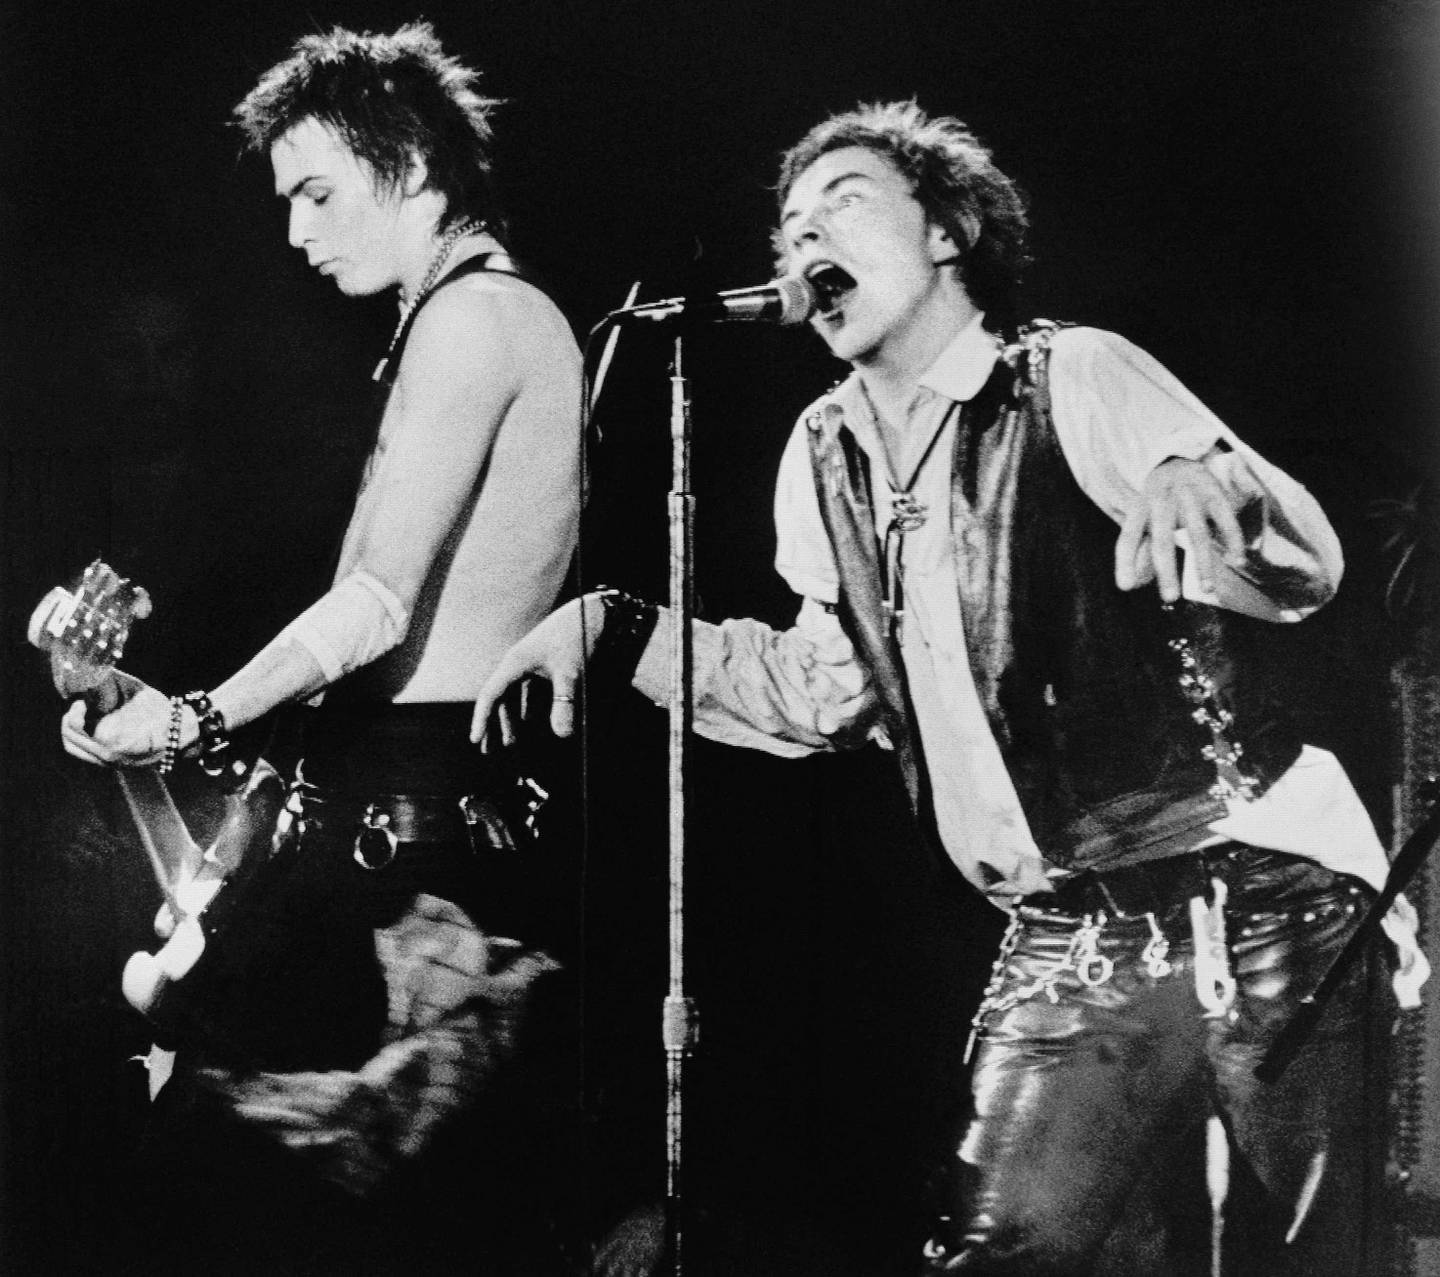 Sid Vicious, left, on base guitar and Johnny Rotten of the punk rock group The Sex Pistols perform in front of a capacity crowd at San Francisco's Winterland auditorium Saturday night January 15, 1978. This was the Sex Pistols' last stop on their American tour. (AP Photo)